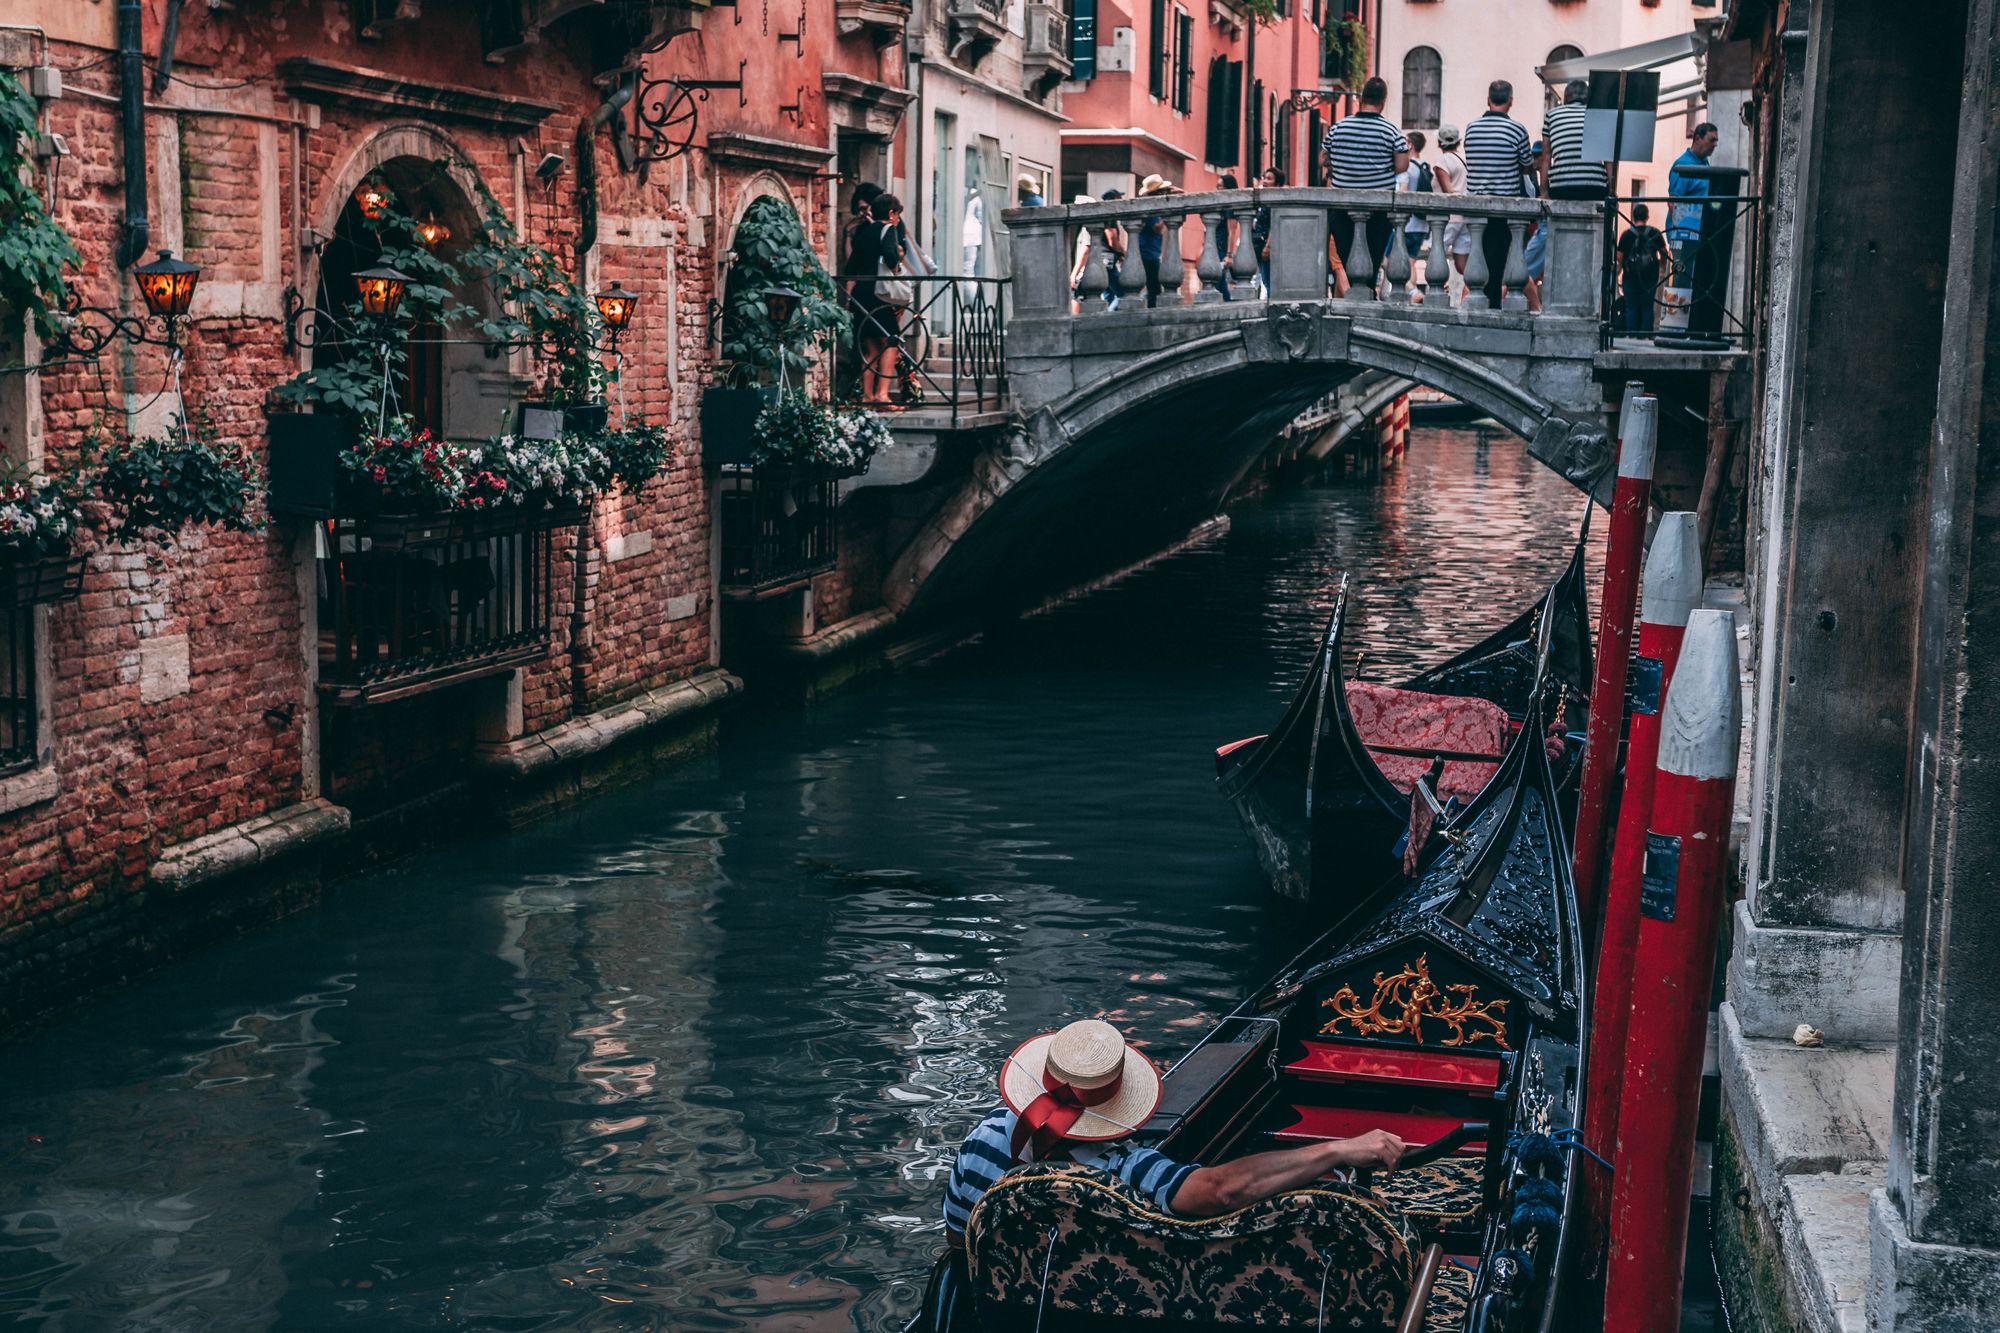 getting lost in Venice. In the pic: Venice canal (photo by hitesh choudhary - via pexels)